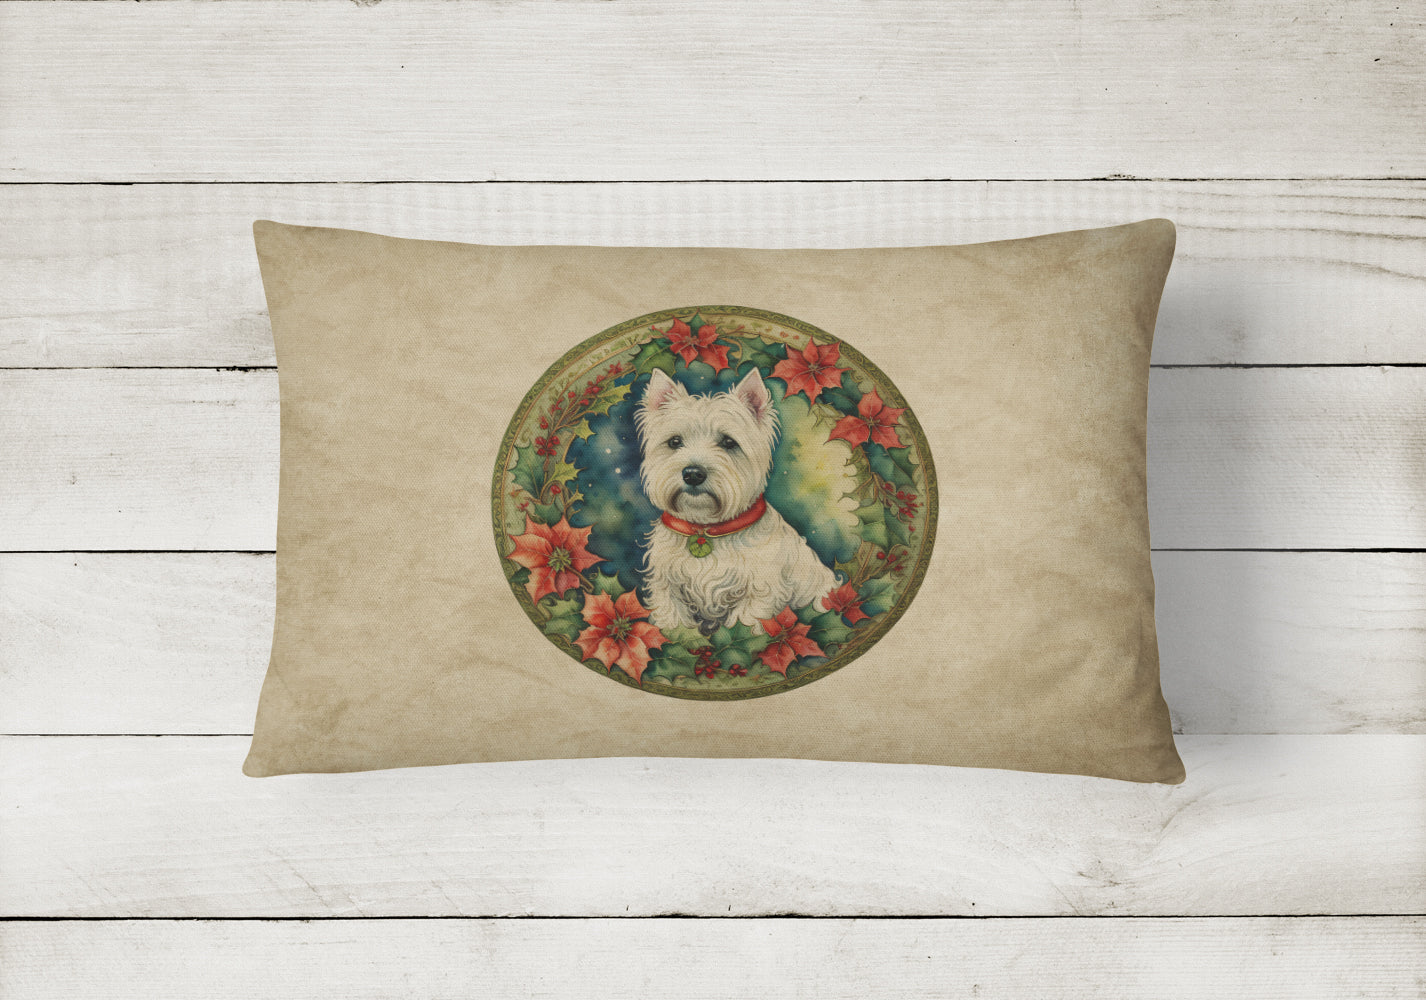 Buy this Westie Christmas Flowers Throw Pillow